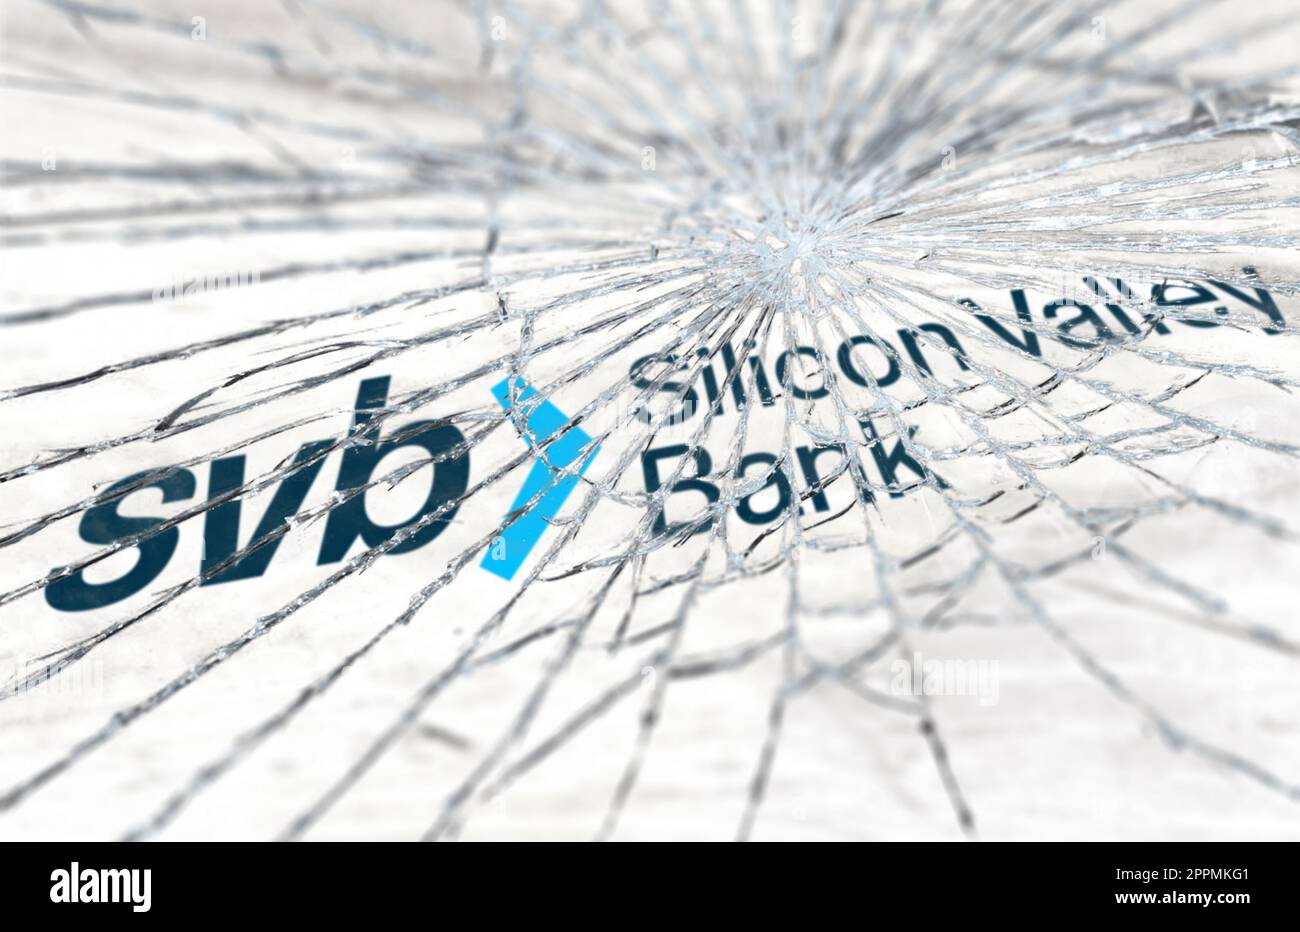 Broken glass with the Silicon Valley Bank logo blurred in the background Stock Photo